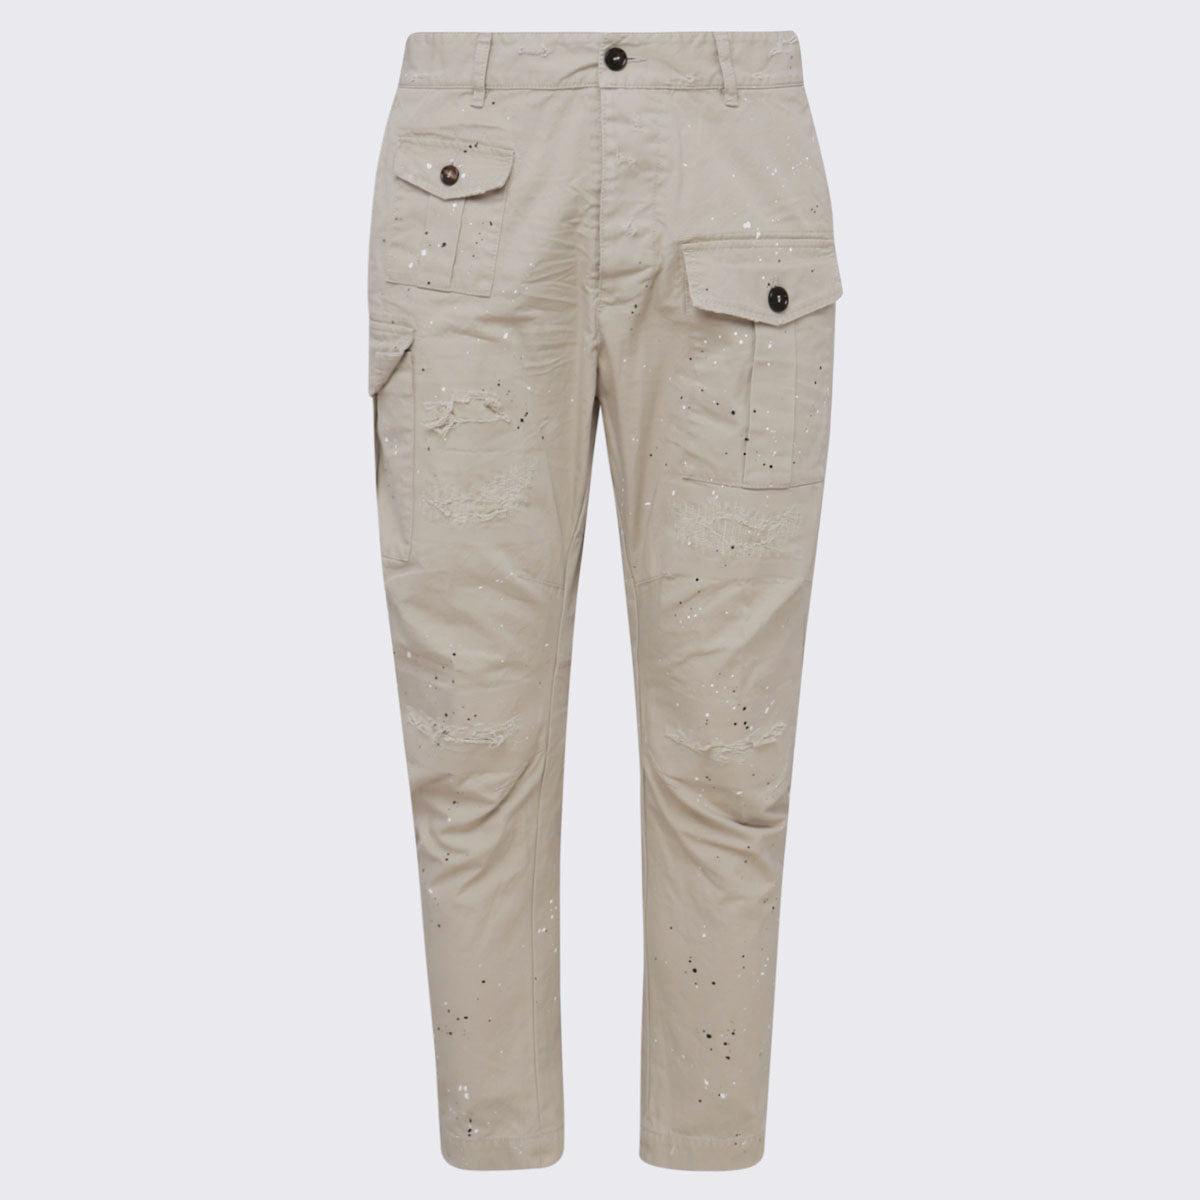 Slacks and Chinos Slacks and Chinos DSquared² Trousers Natural DSquared² Cotton Trouser in Beige Mens Trousers for Men 